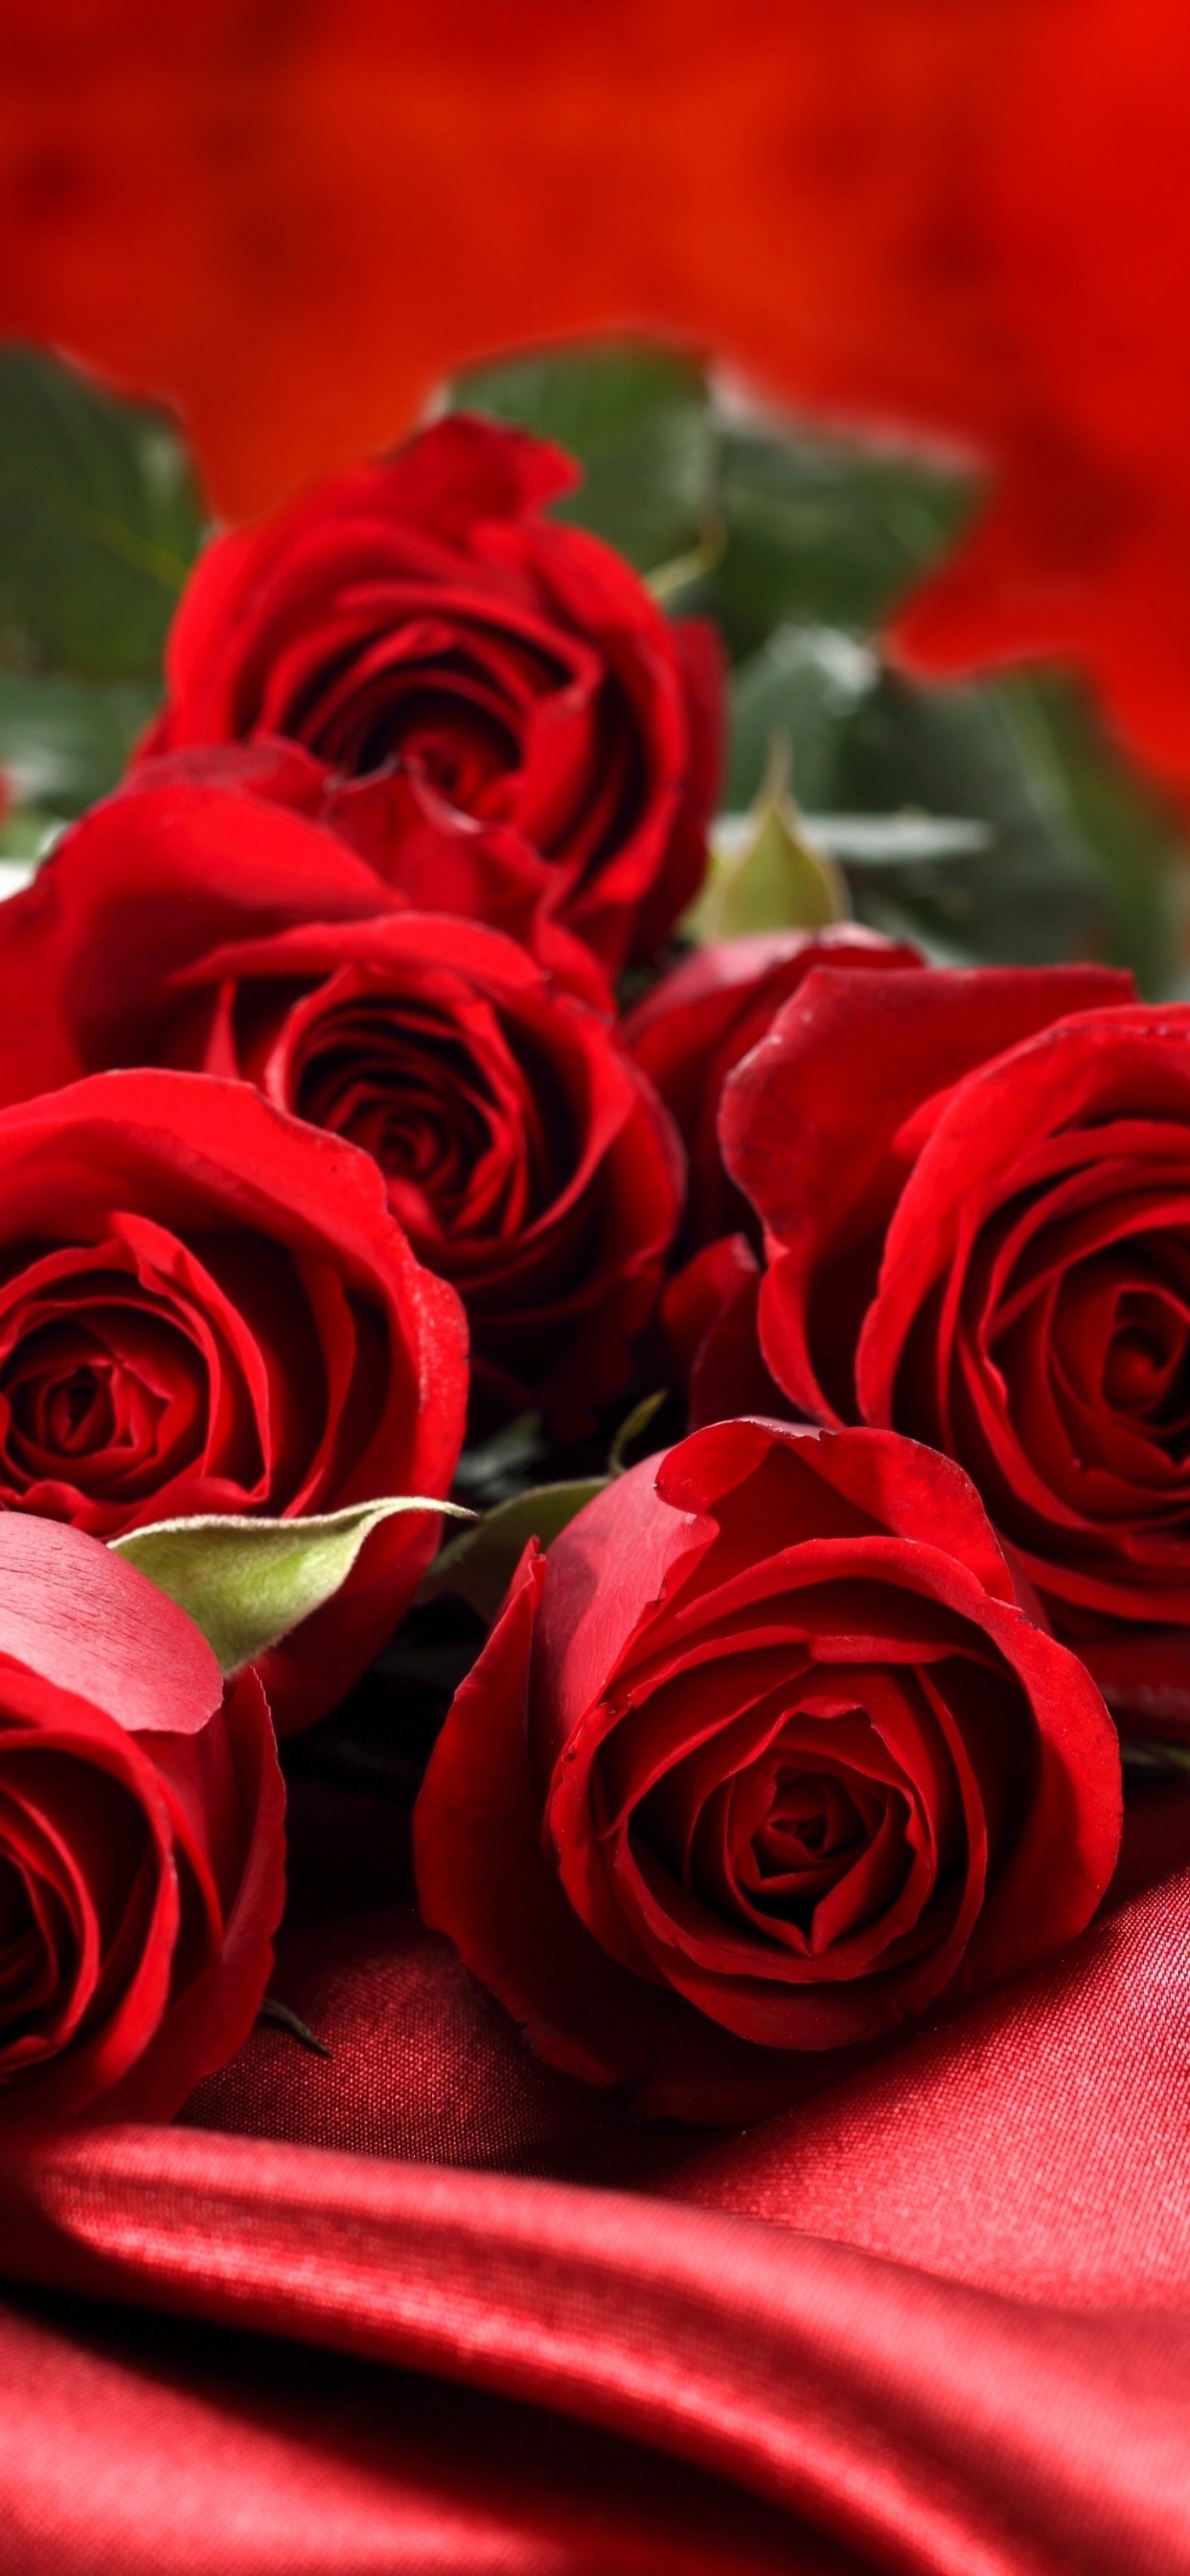 Red Roses on Red Textile. Wallpaper in 1242x2688 Resolution